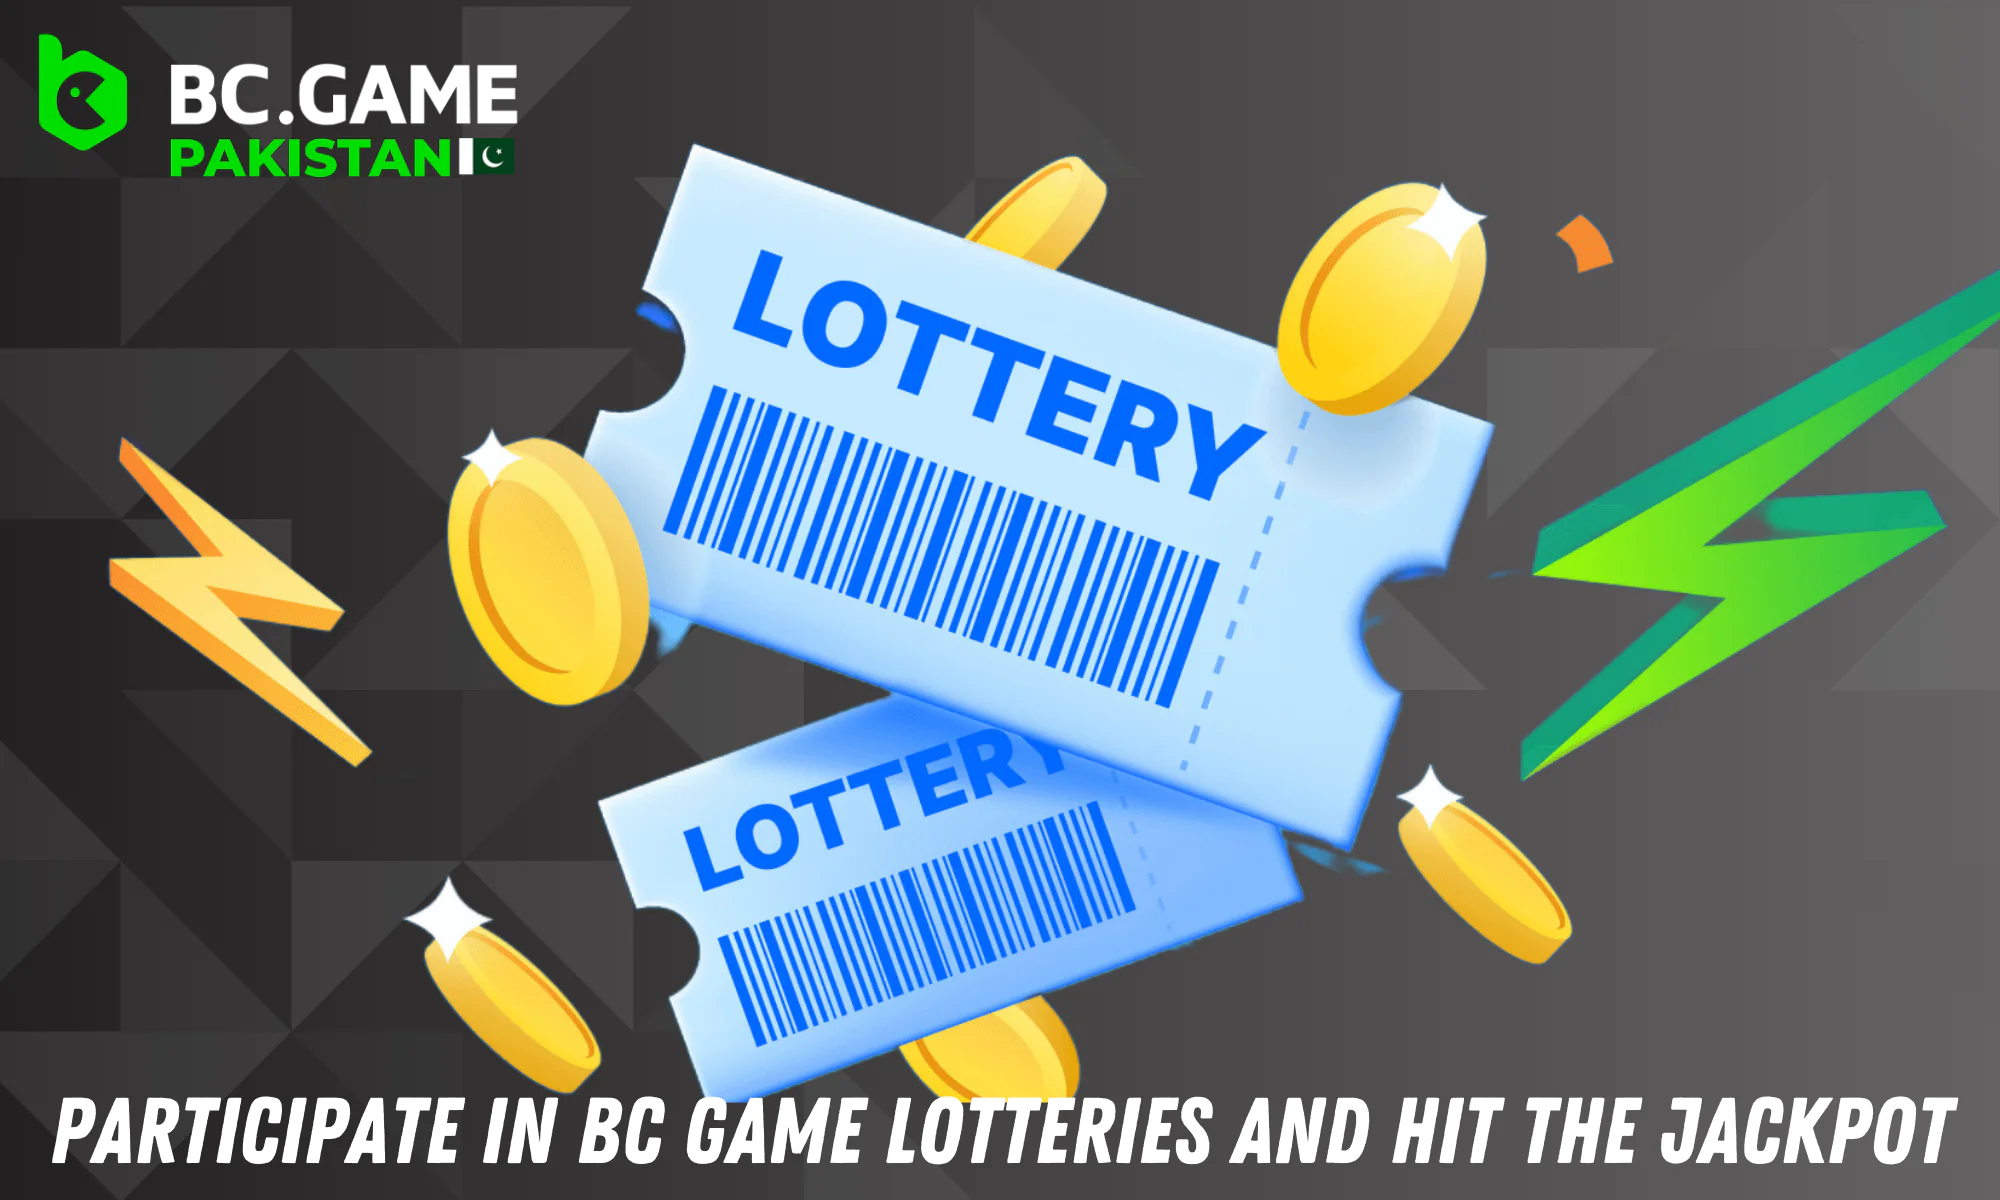 Lotteries are part of BC Game's casino offerings